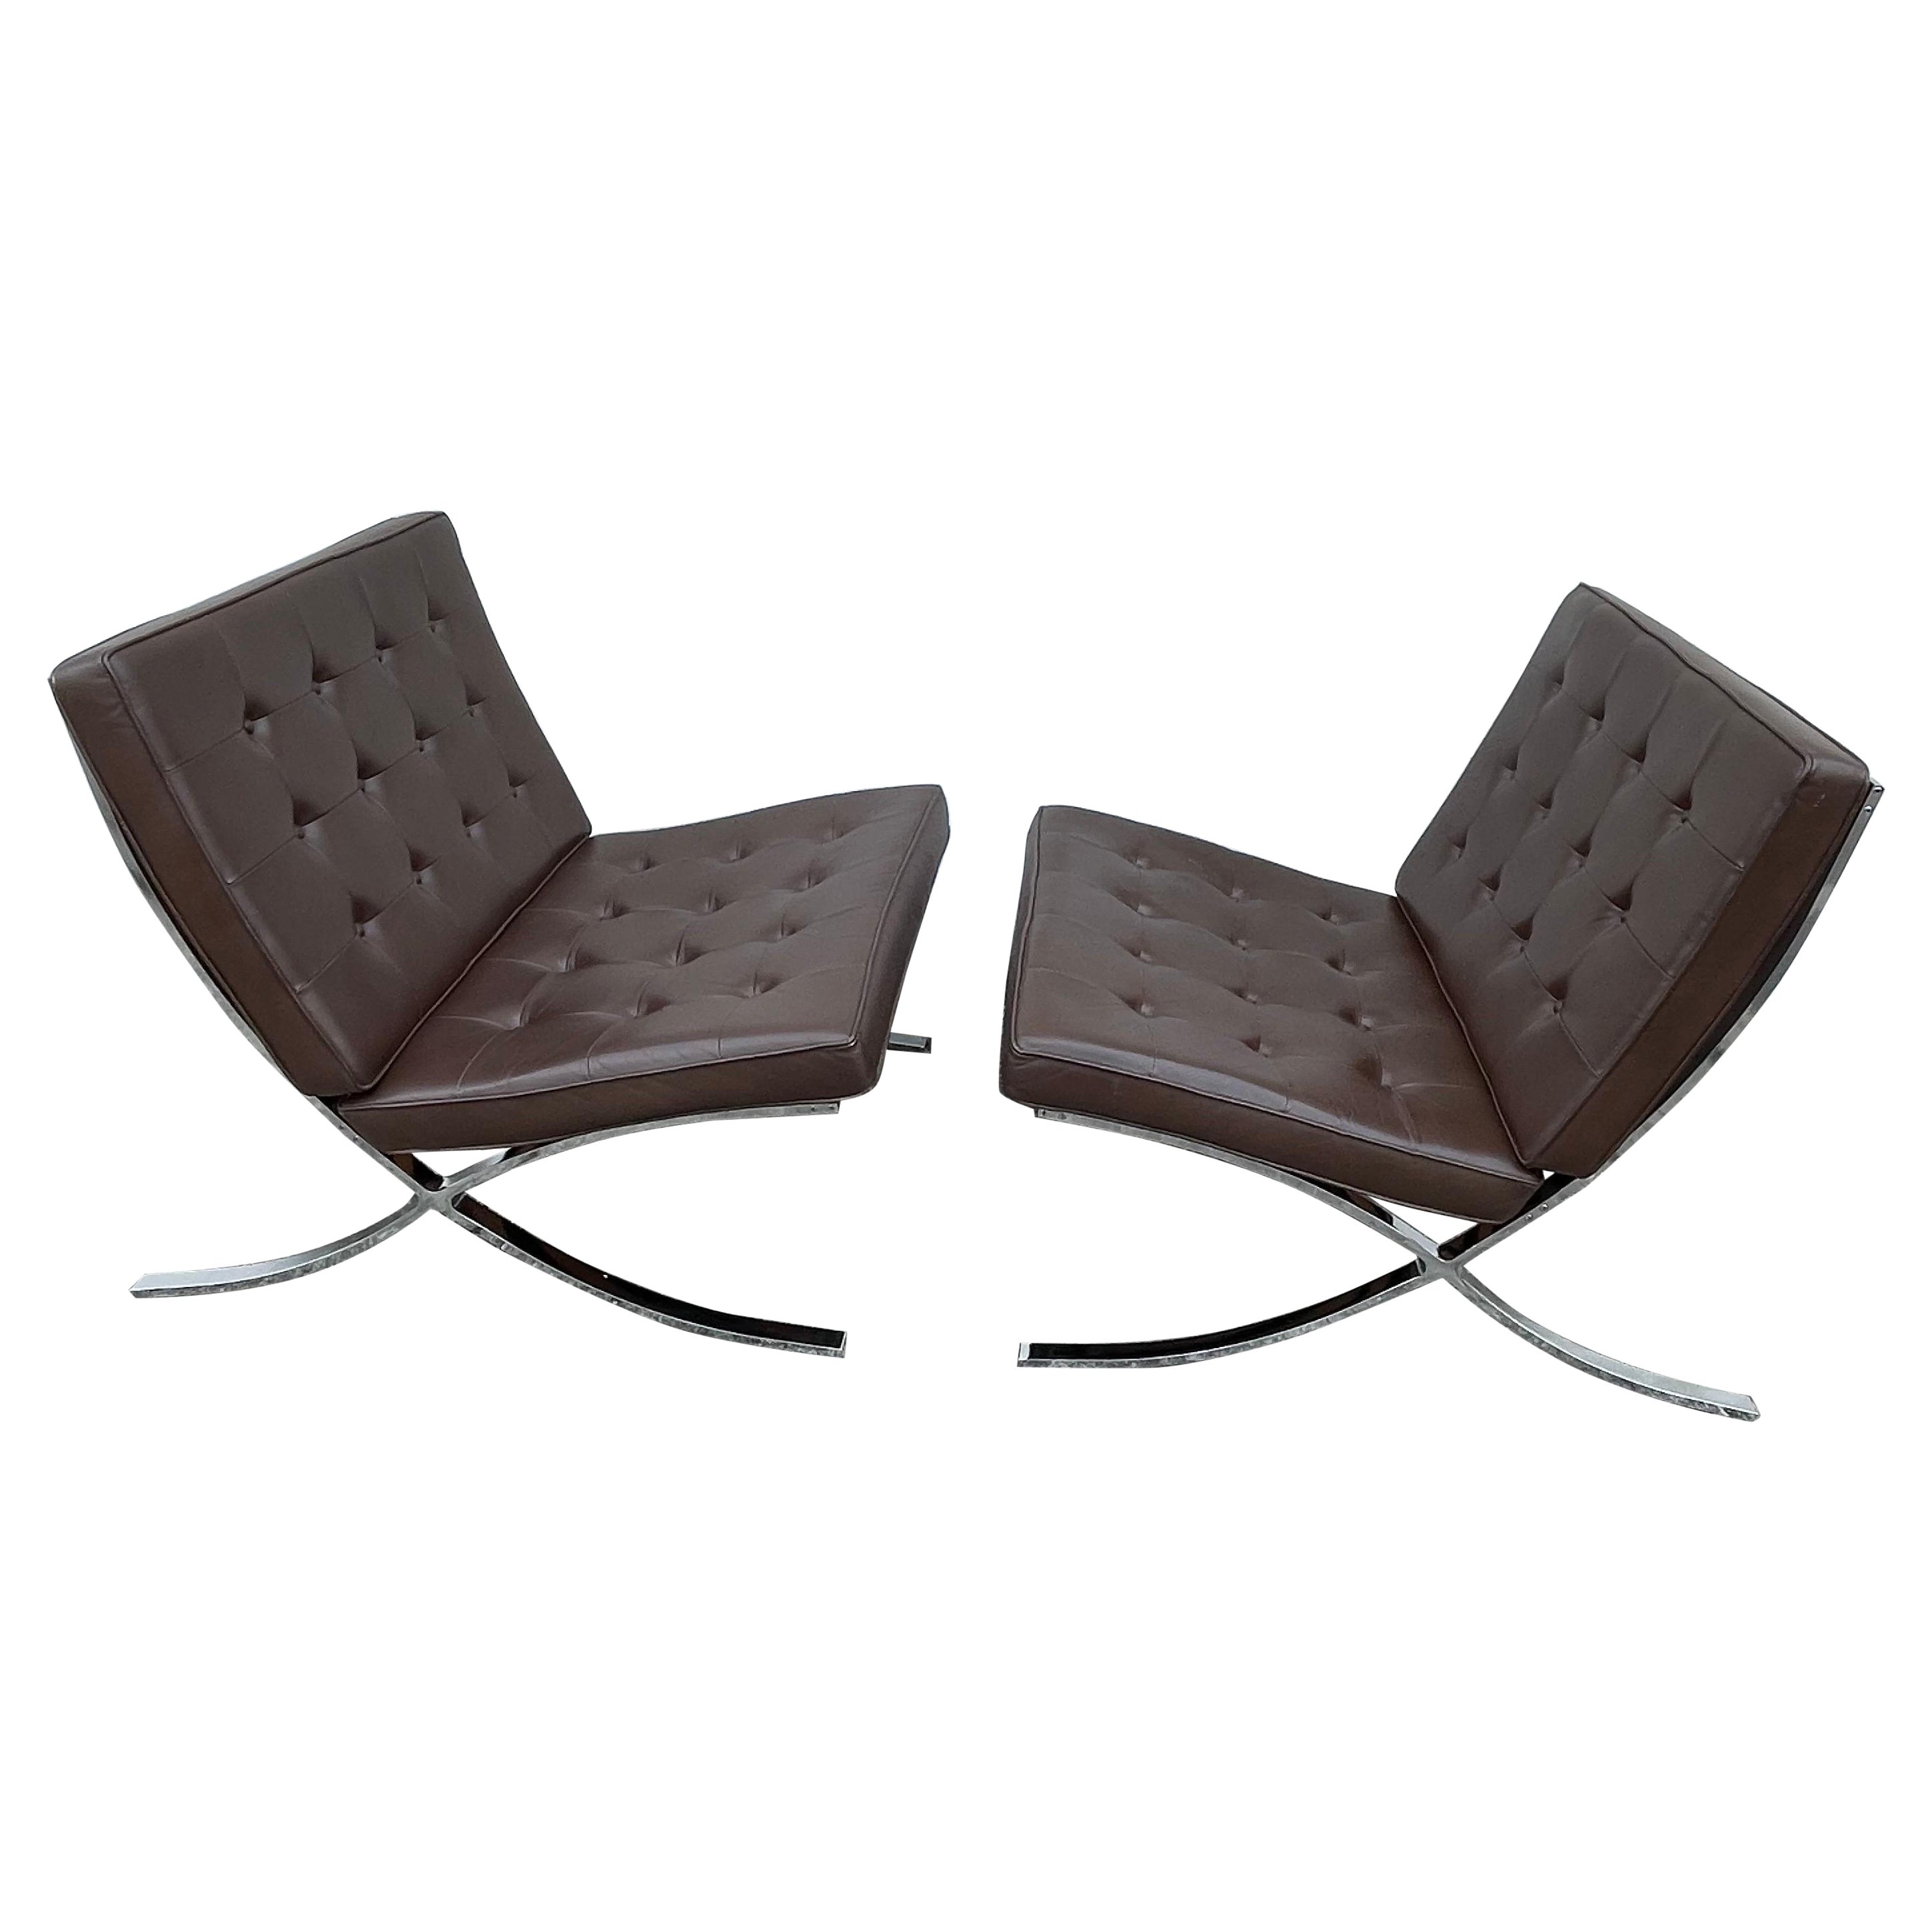 Pair of Mid-Century Modern Barcelona Chairs in Brown Leather, 1970's Generation For Sale